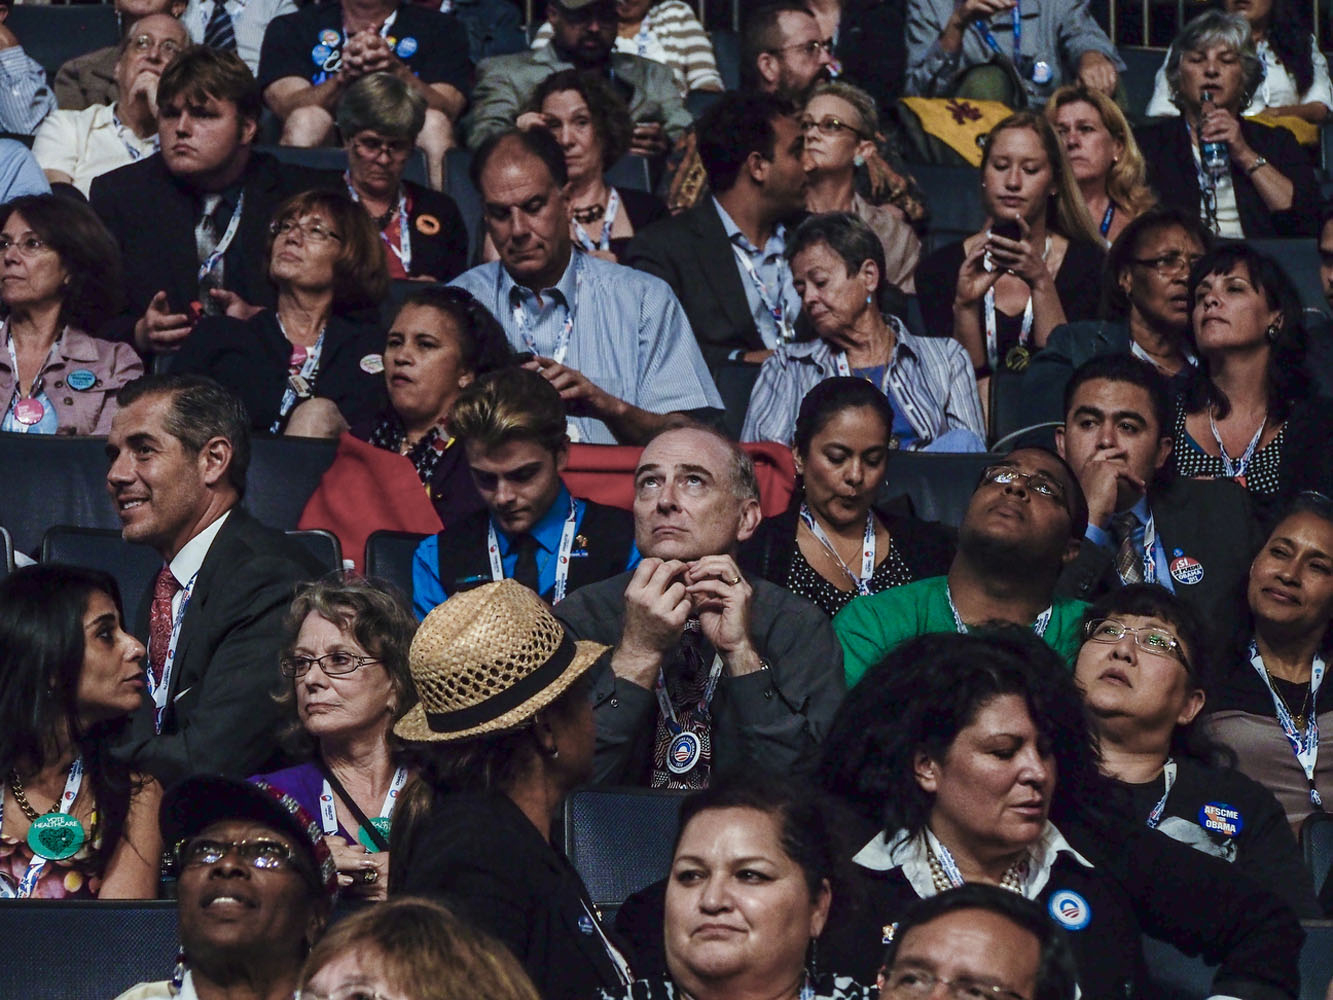 Image: Inside the Democratic National Convention in Charlotte, N.C. Sept. 4, 2012.